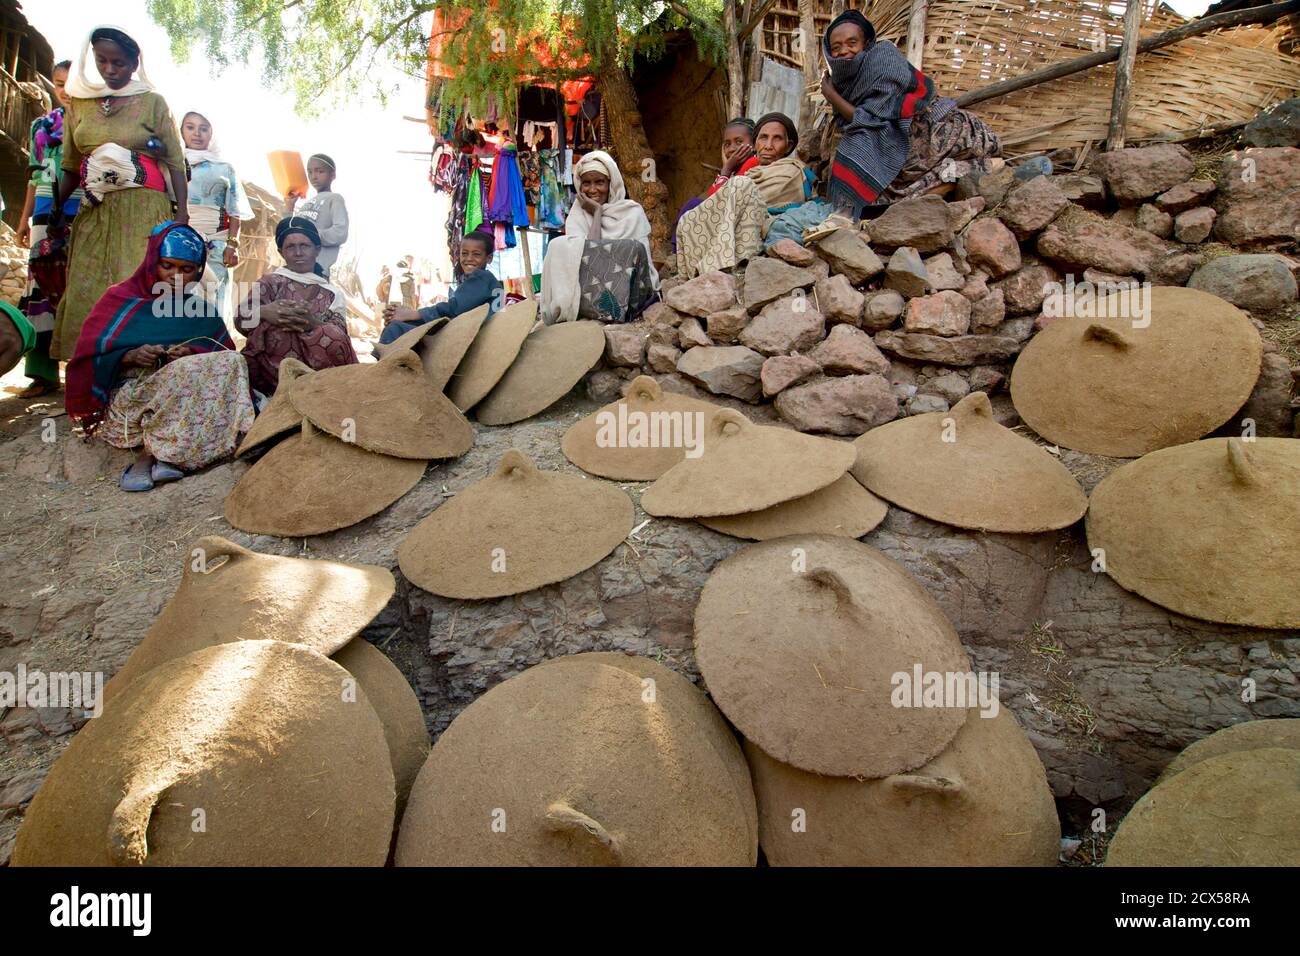 Ethiopian women selling clay injera cooking covers. Market day in Lalibela. Ethiopia Stock Photo